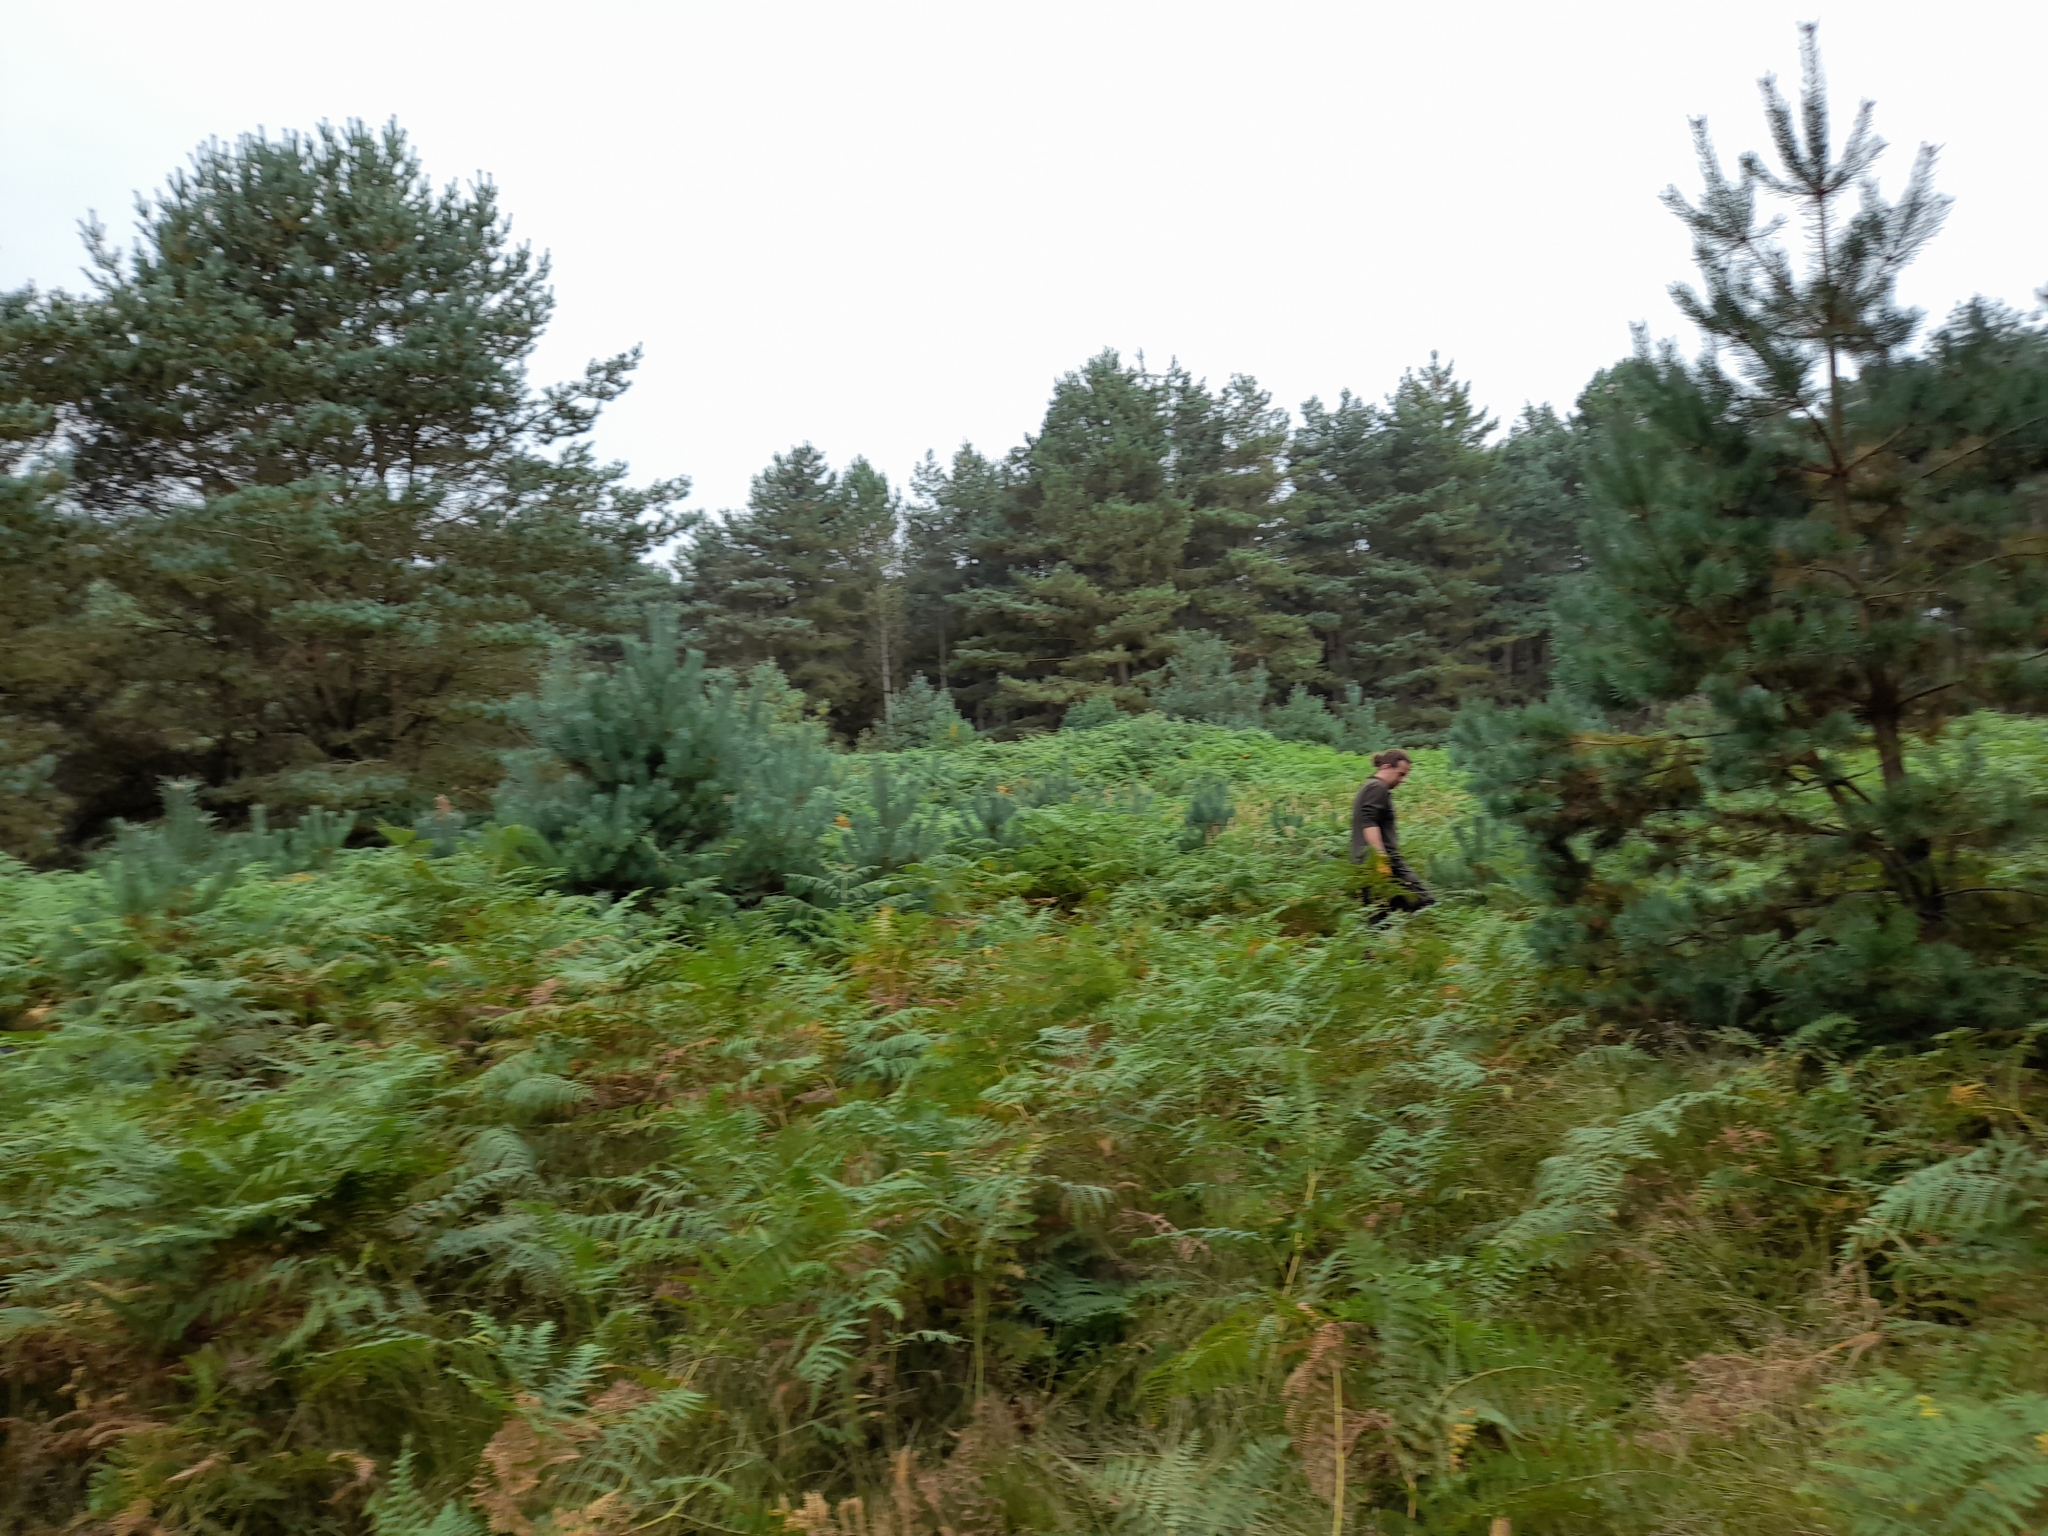 A photo from the FoTF Conservation Event - September 2021 - Brash Clearance at the Goshwak Trail : A volunteer walks amongst a large patch of Bracken